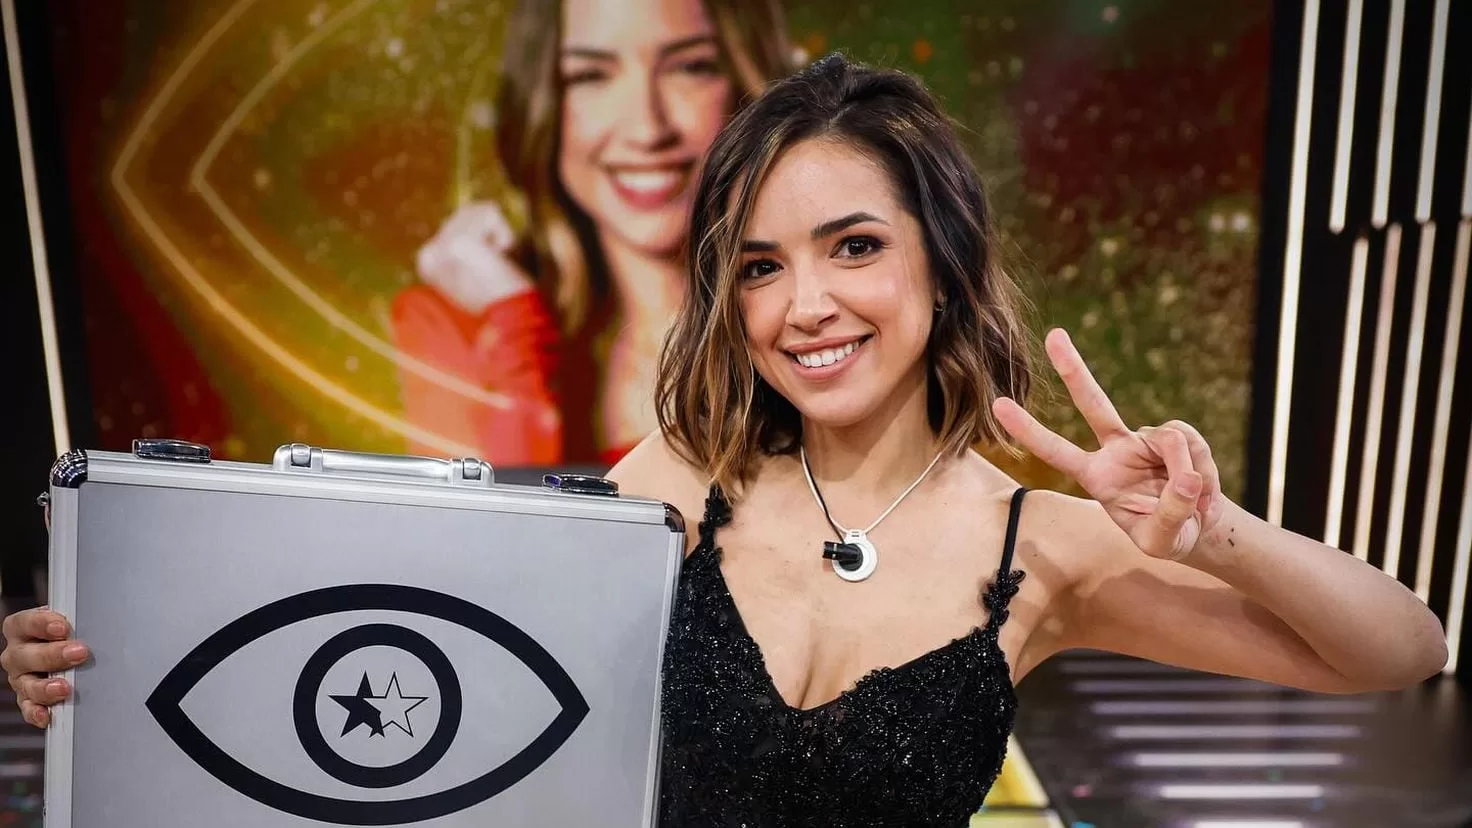 Luca, winner of GH Do 2, tells what she will do with the prize money: I want to help
